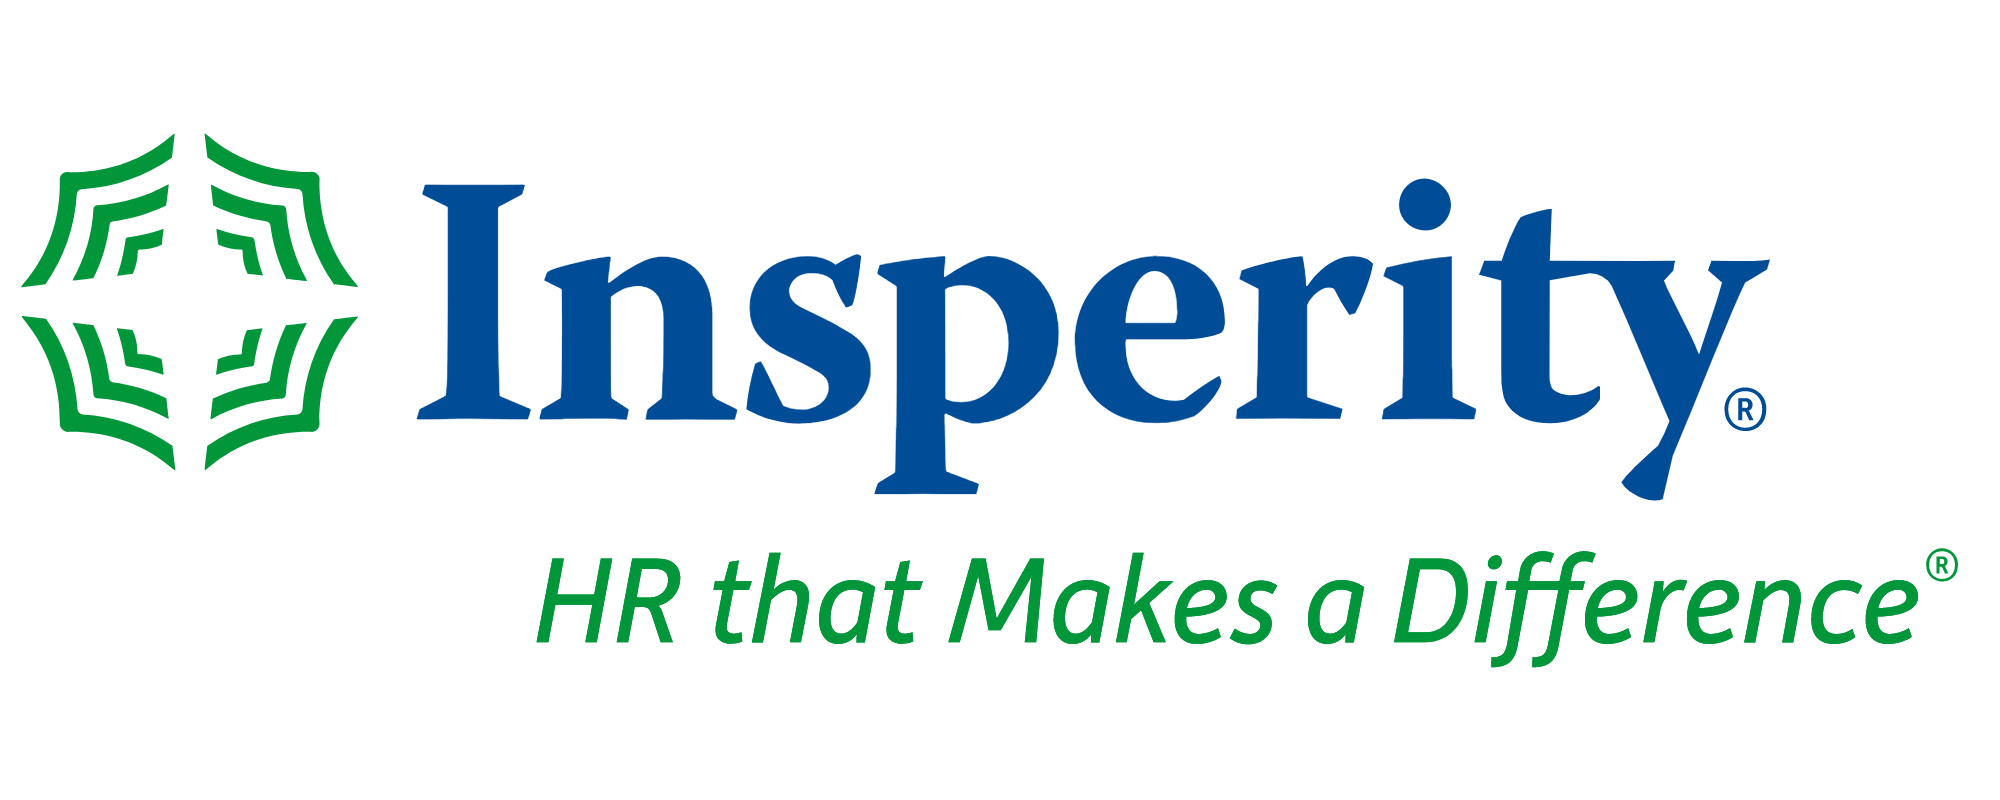 Insperity logo - no background.png